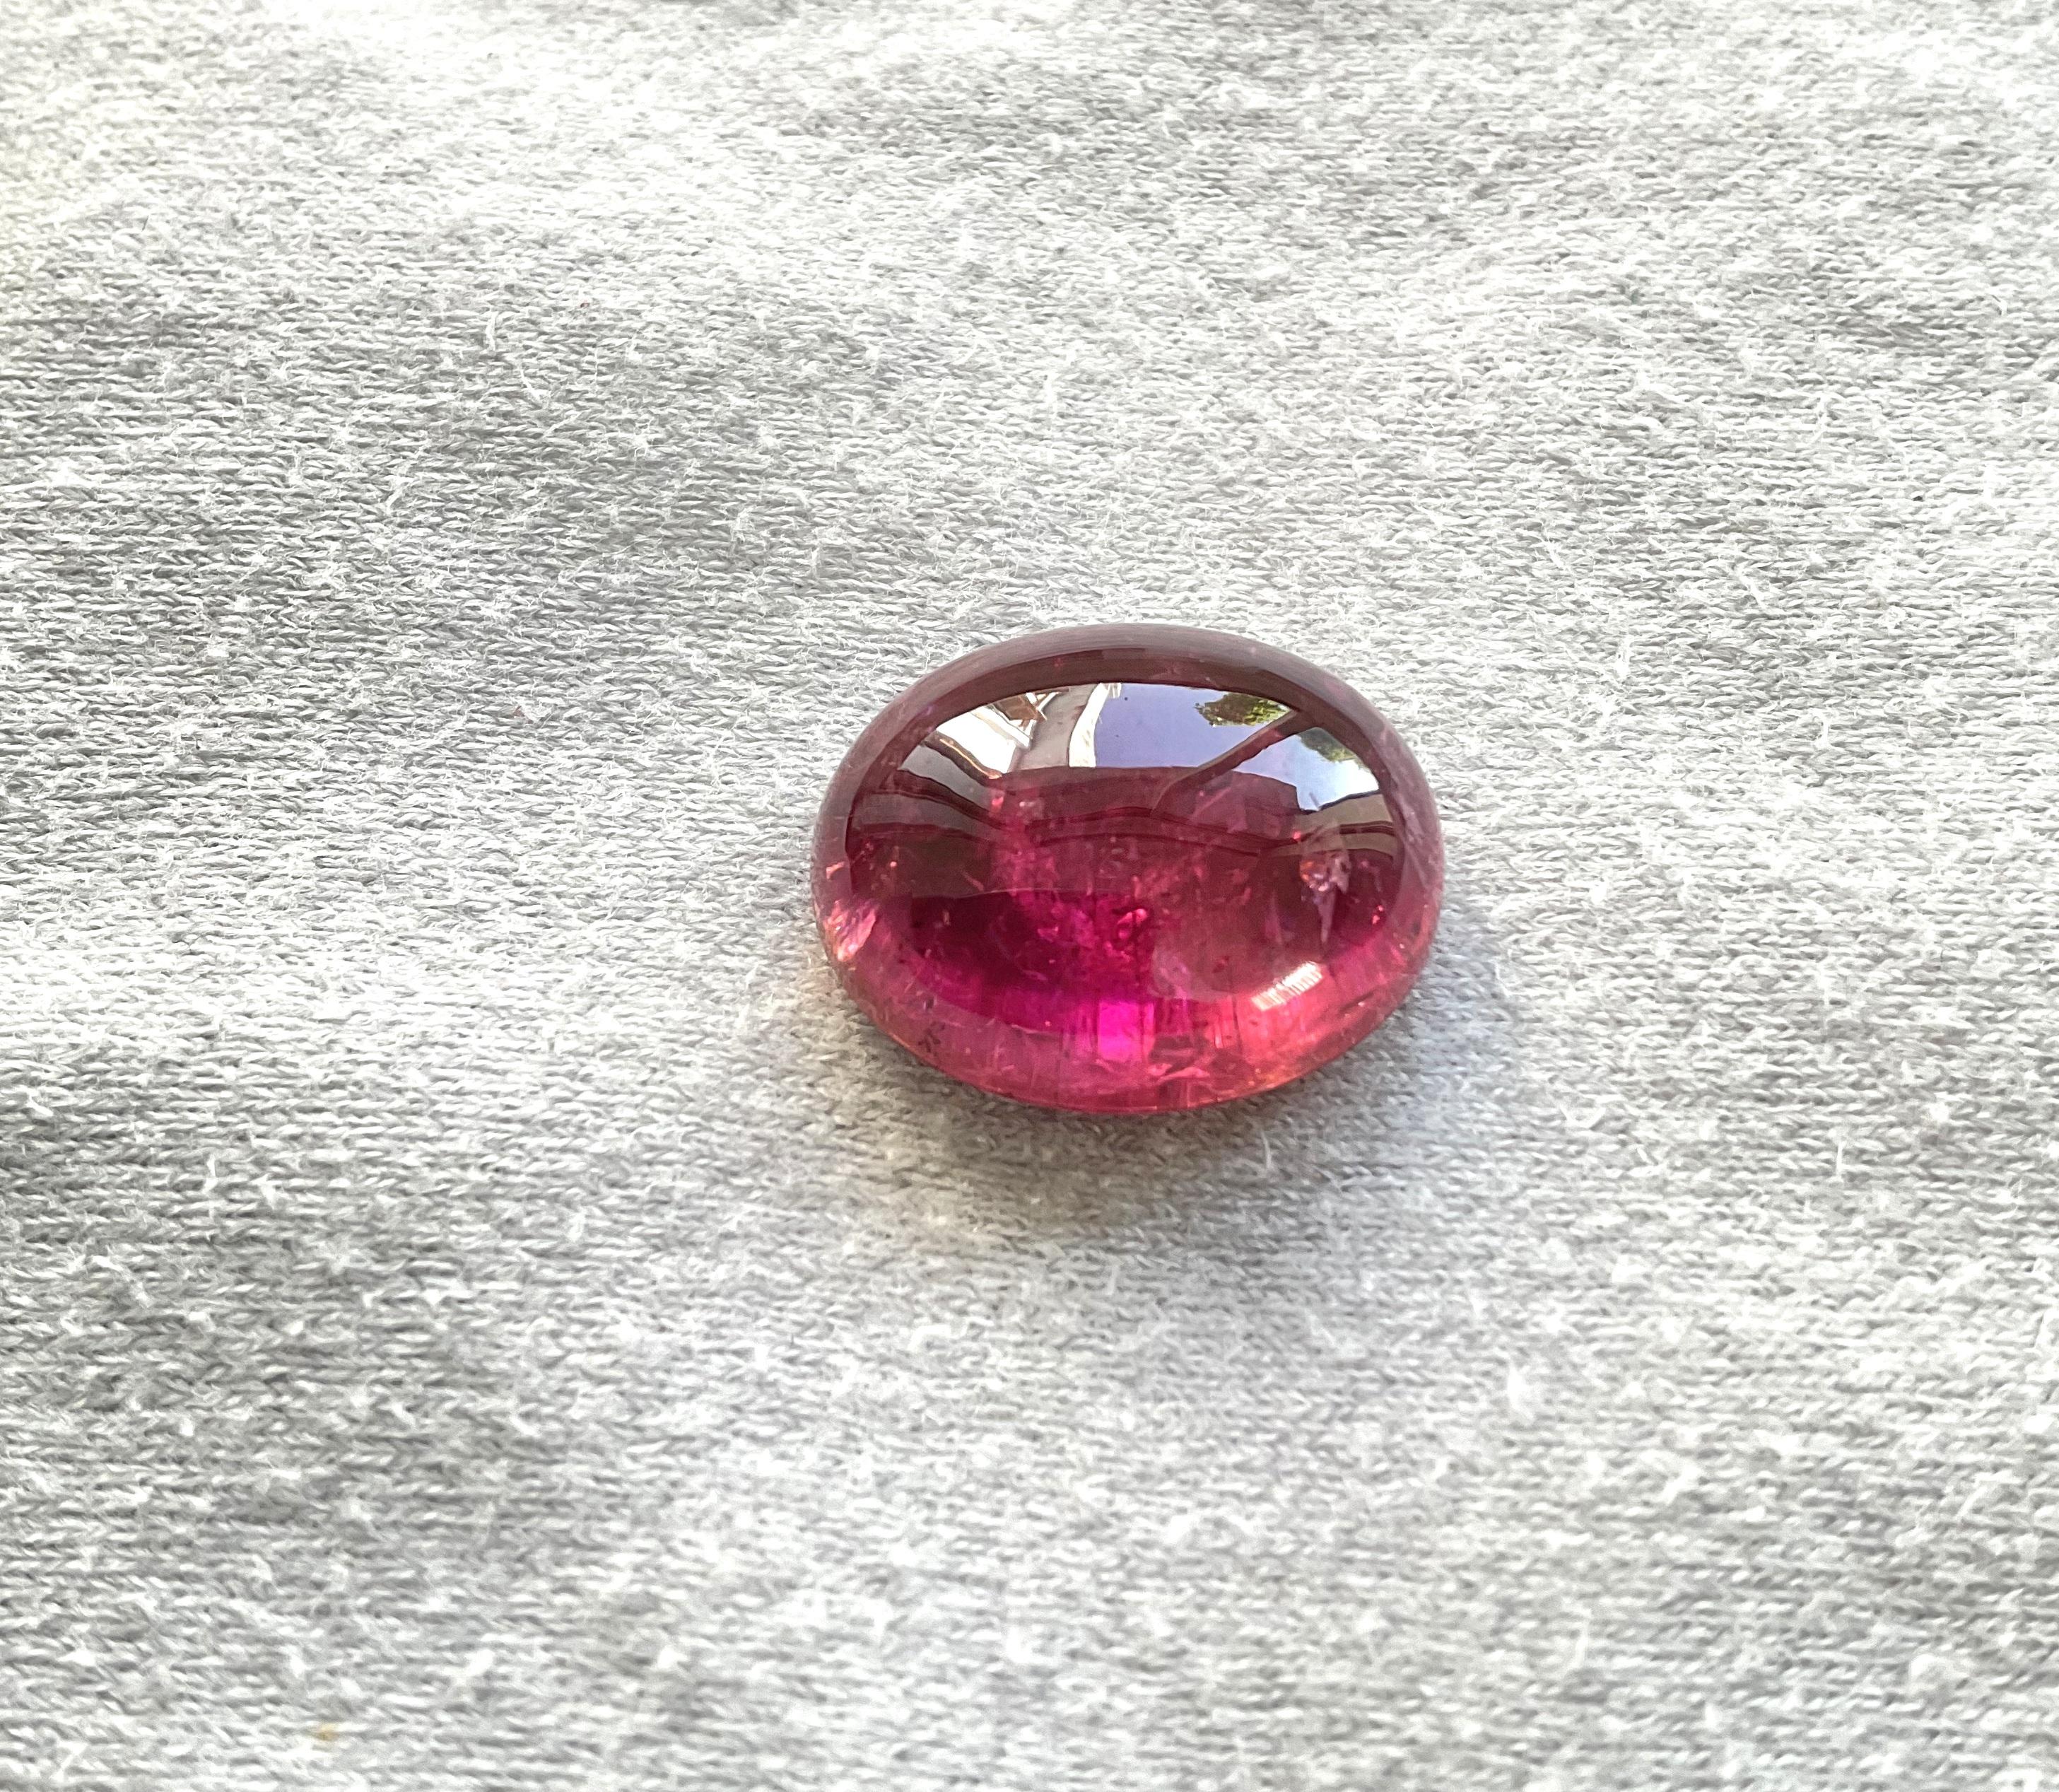 Women's or Men's 24.09 Carats Top Quality Rubellite Tourmaline Cabochon Natural Gemstone For Sale